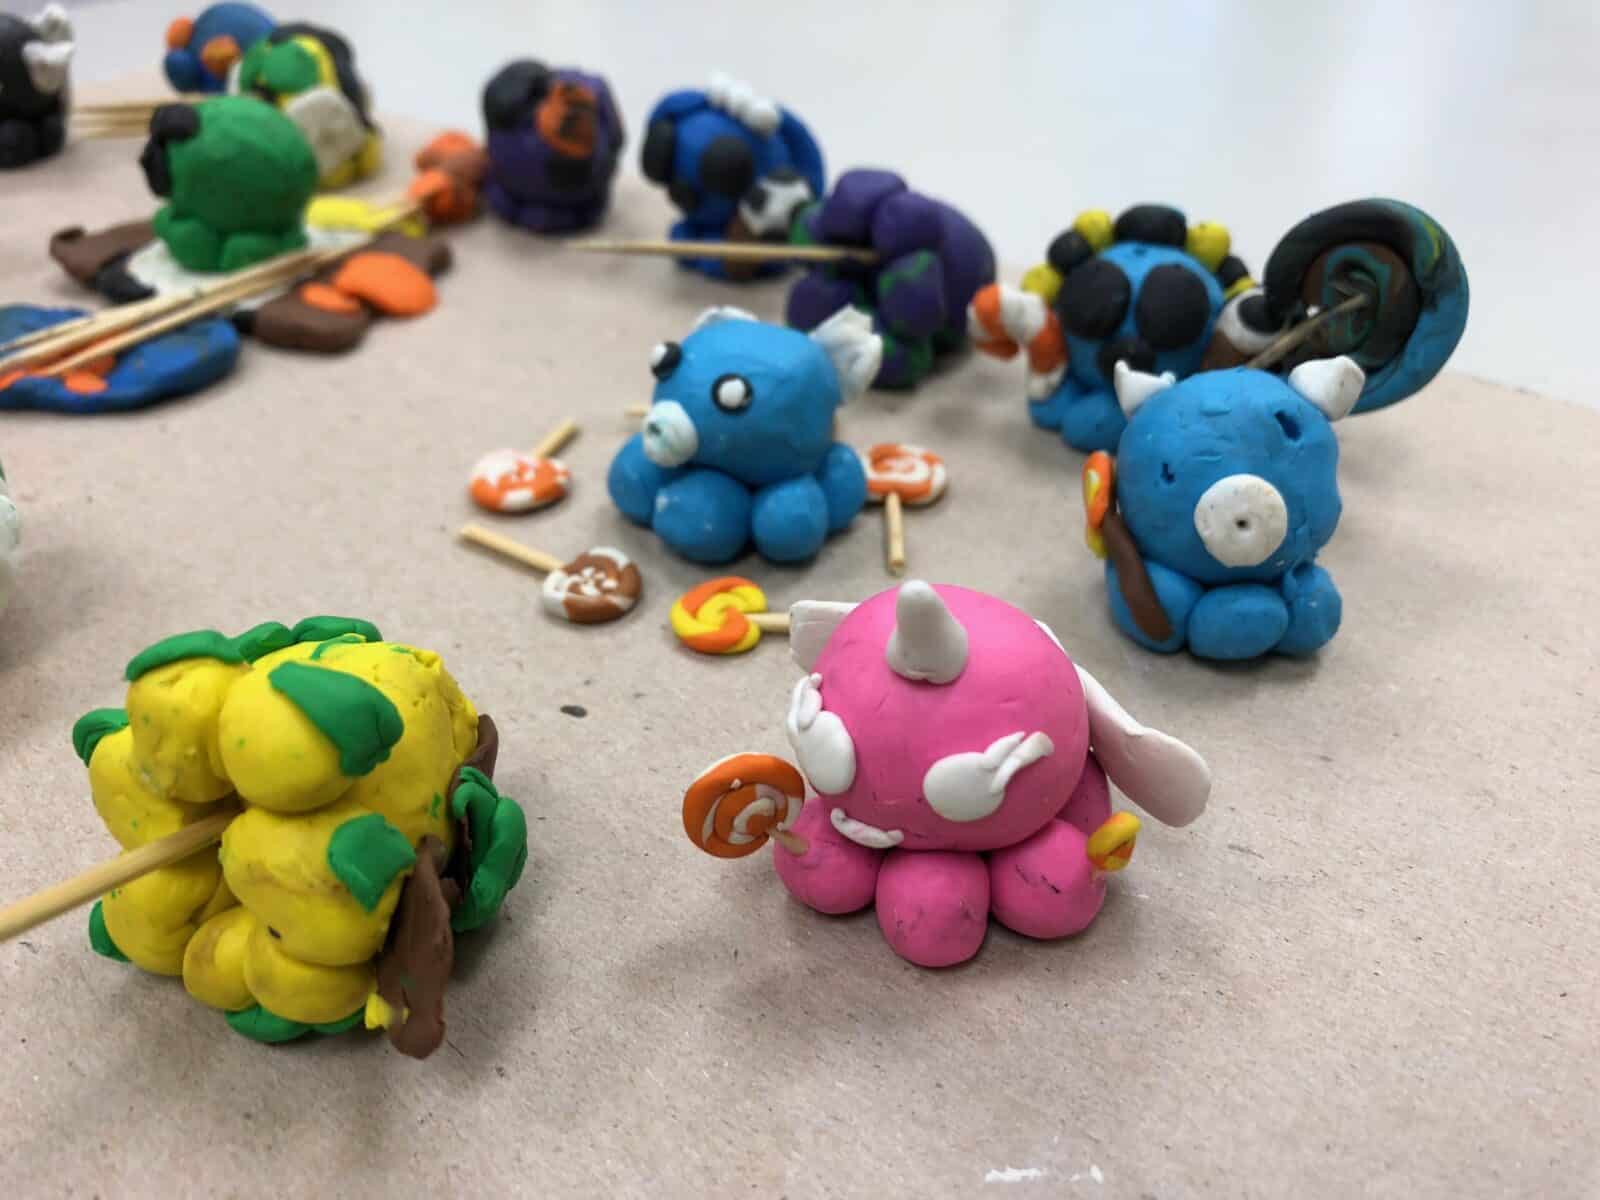 Colorful clay crafts